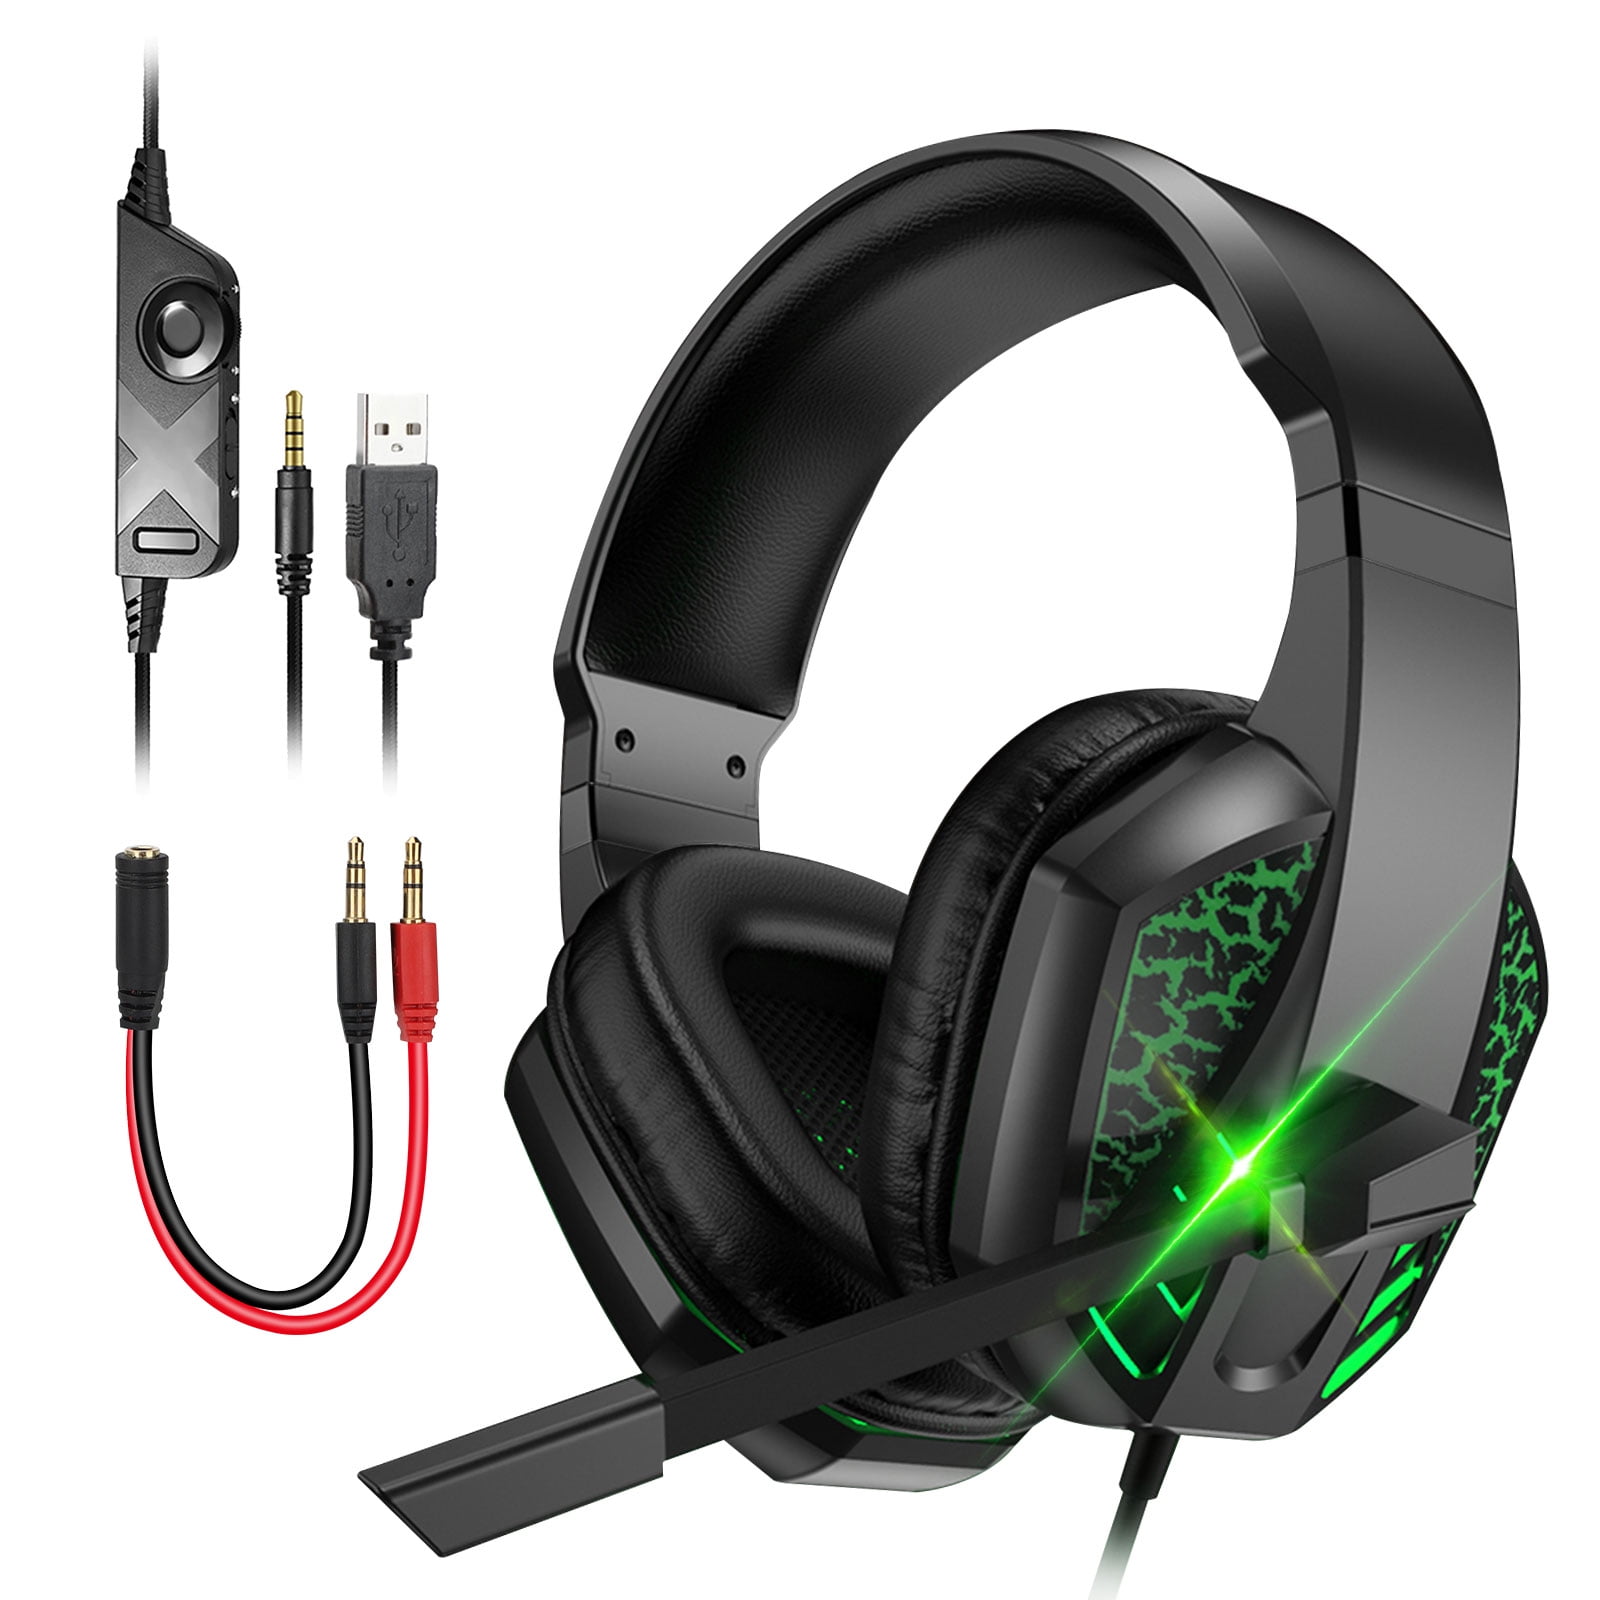 Cozy Best Wireless Headphones For Pc Gaming No Mic with Epic Design ideas